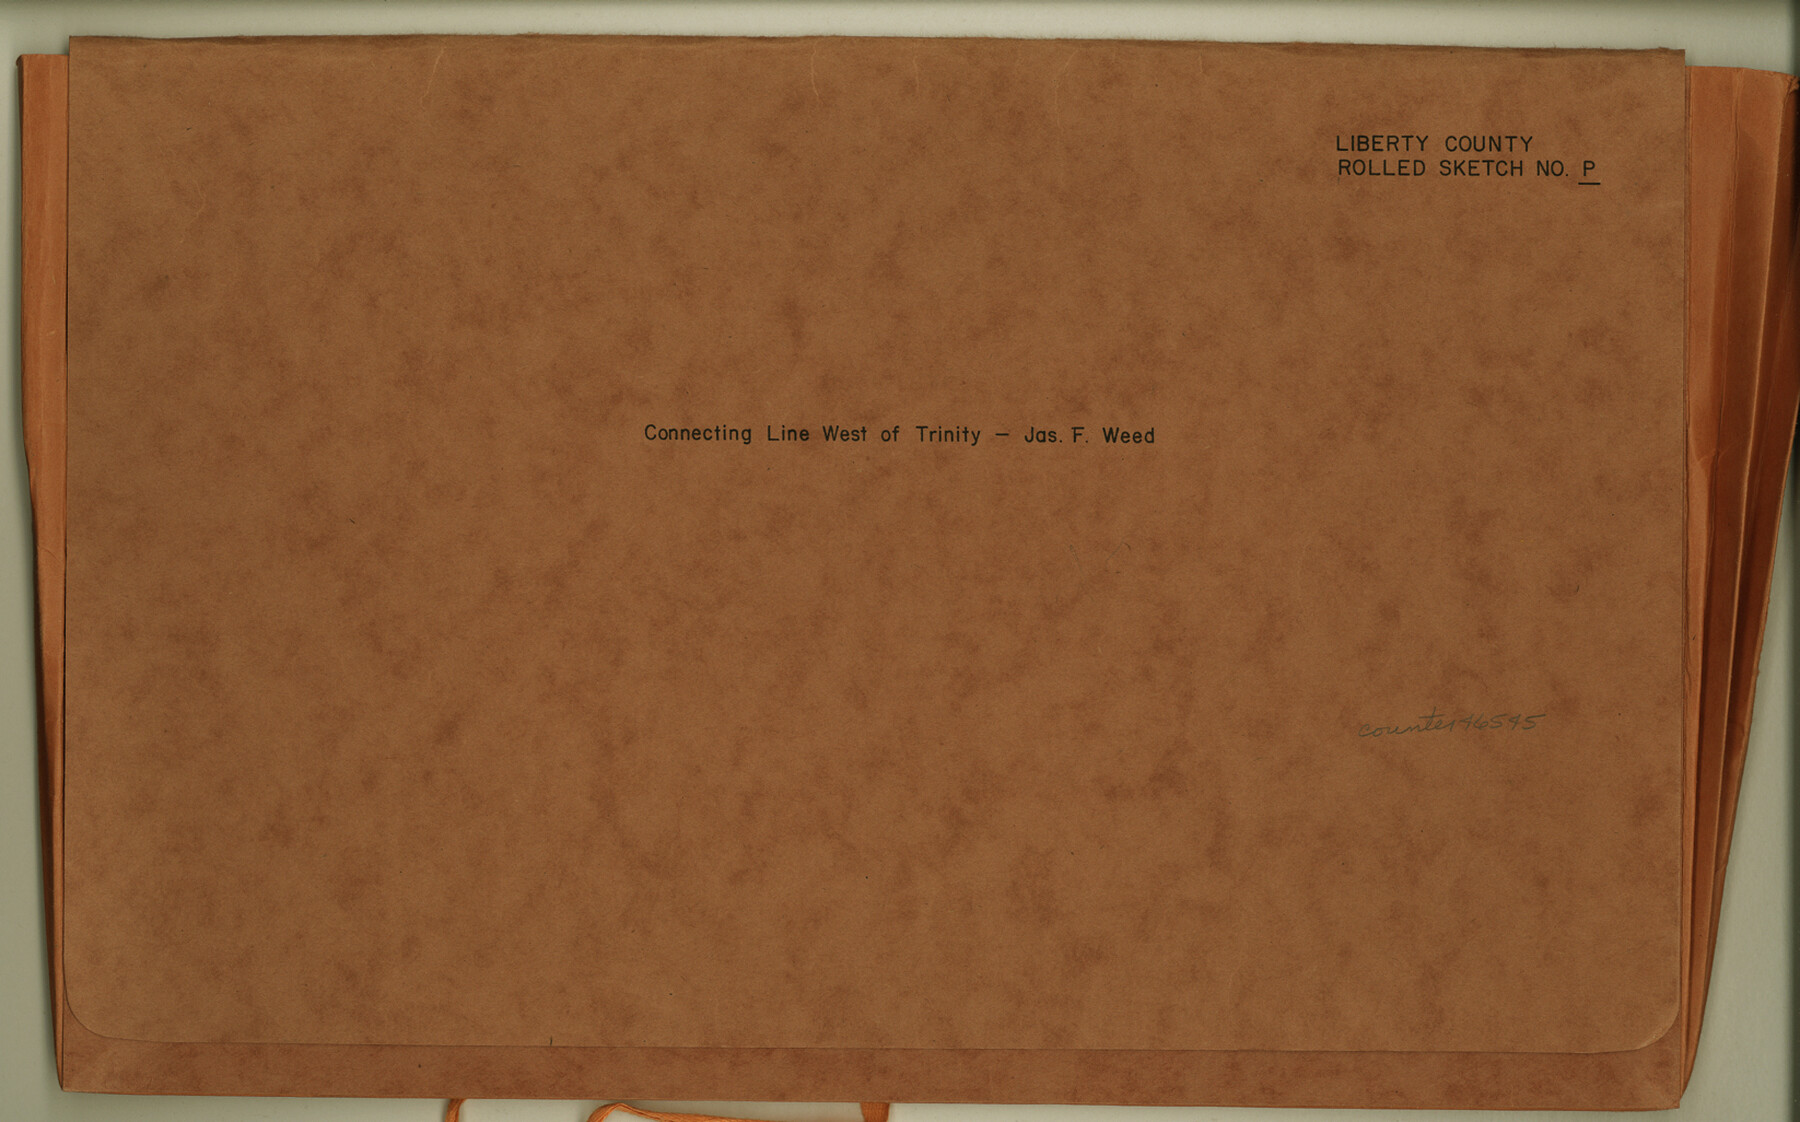 46545, Liberty County Rolled Sketch P, General Map Collection